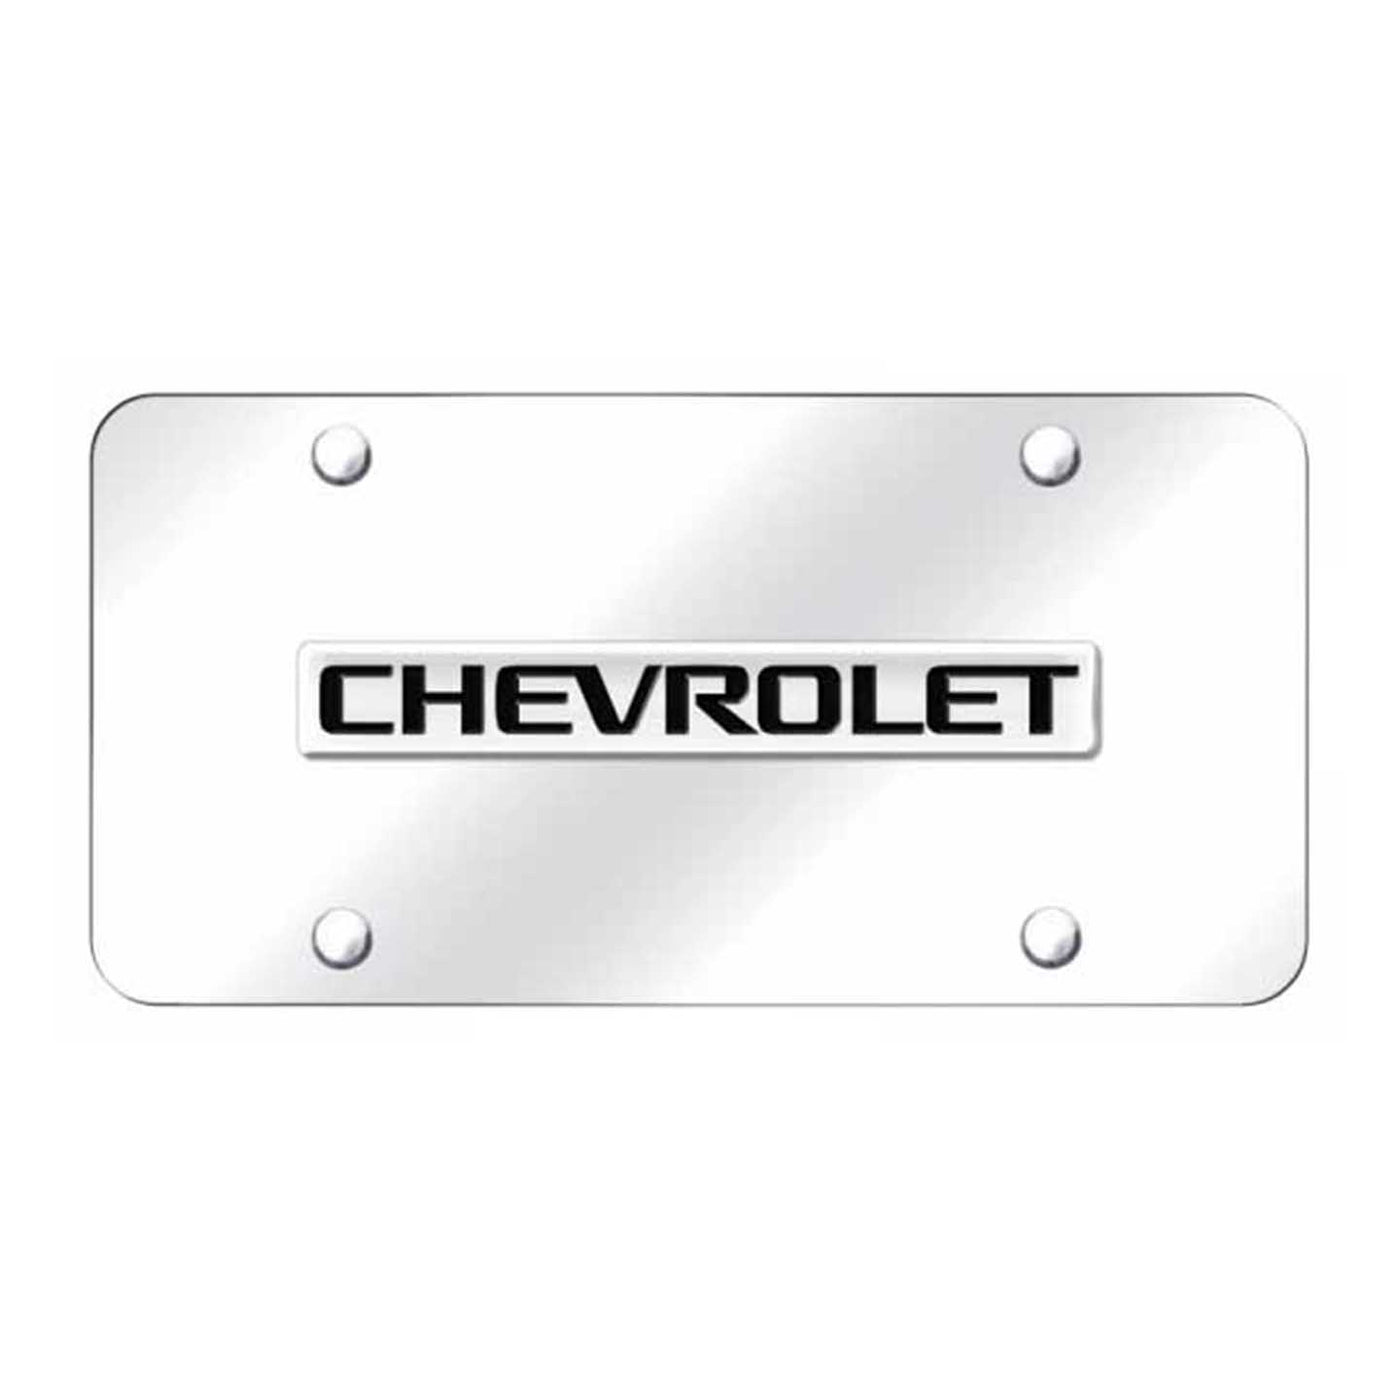 Chevrolet Name License Plate - Chrome on Mirrored